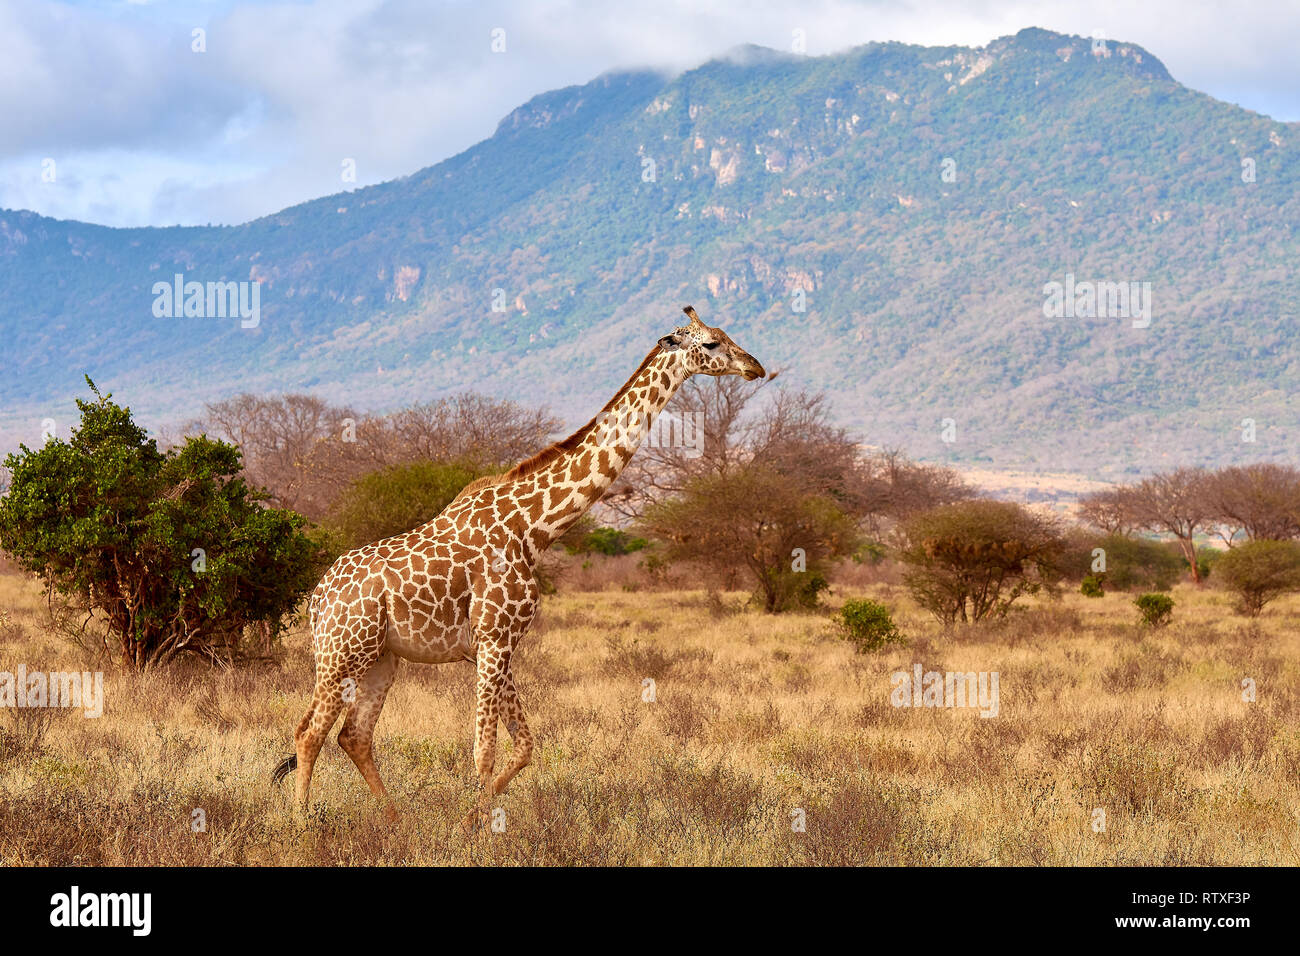 The giraffe is savage and pounding in safari in kenya - africa. Trees and grass with blurred mountains in the background. Stock Photo